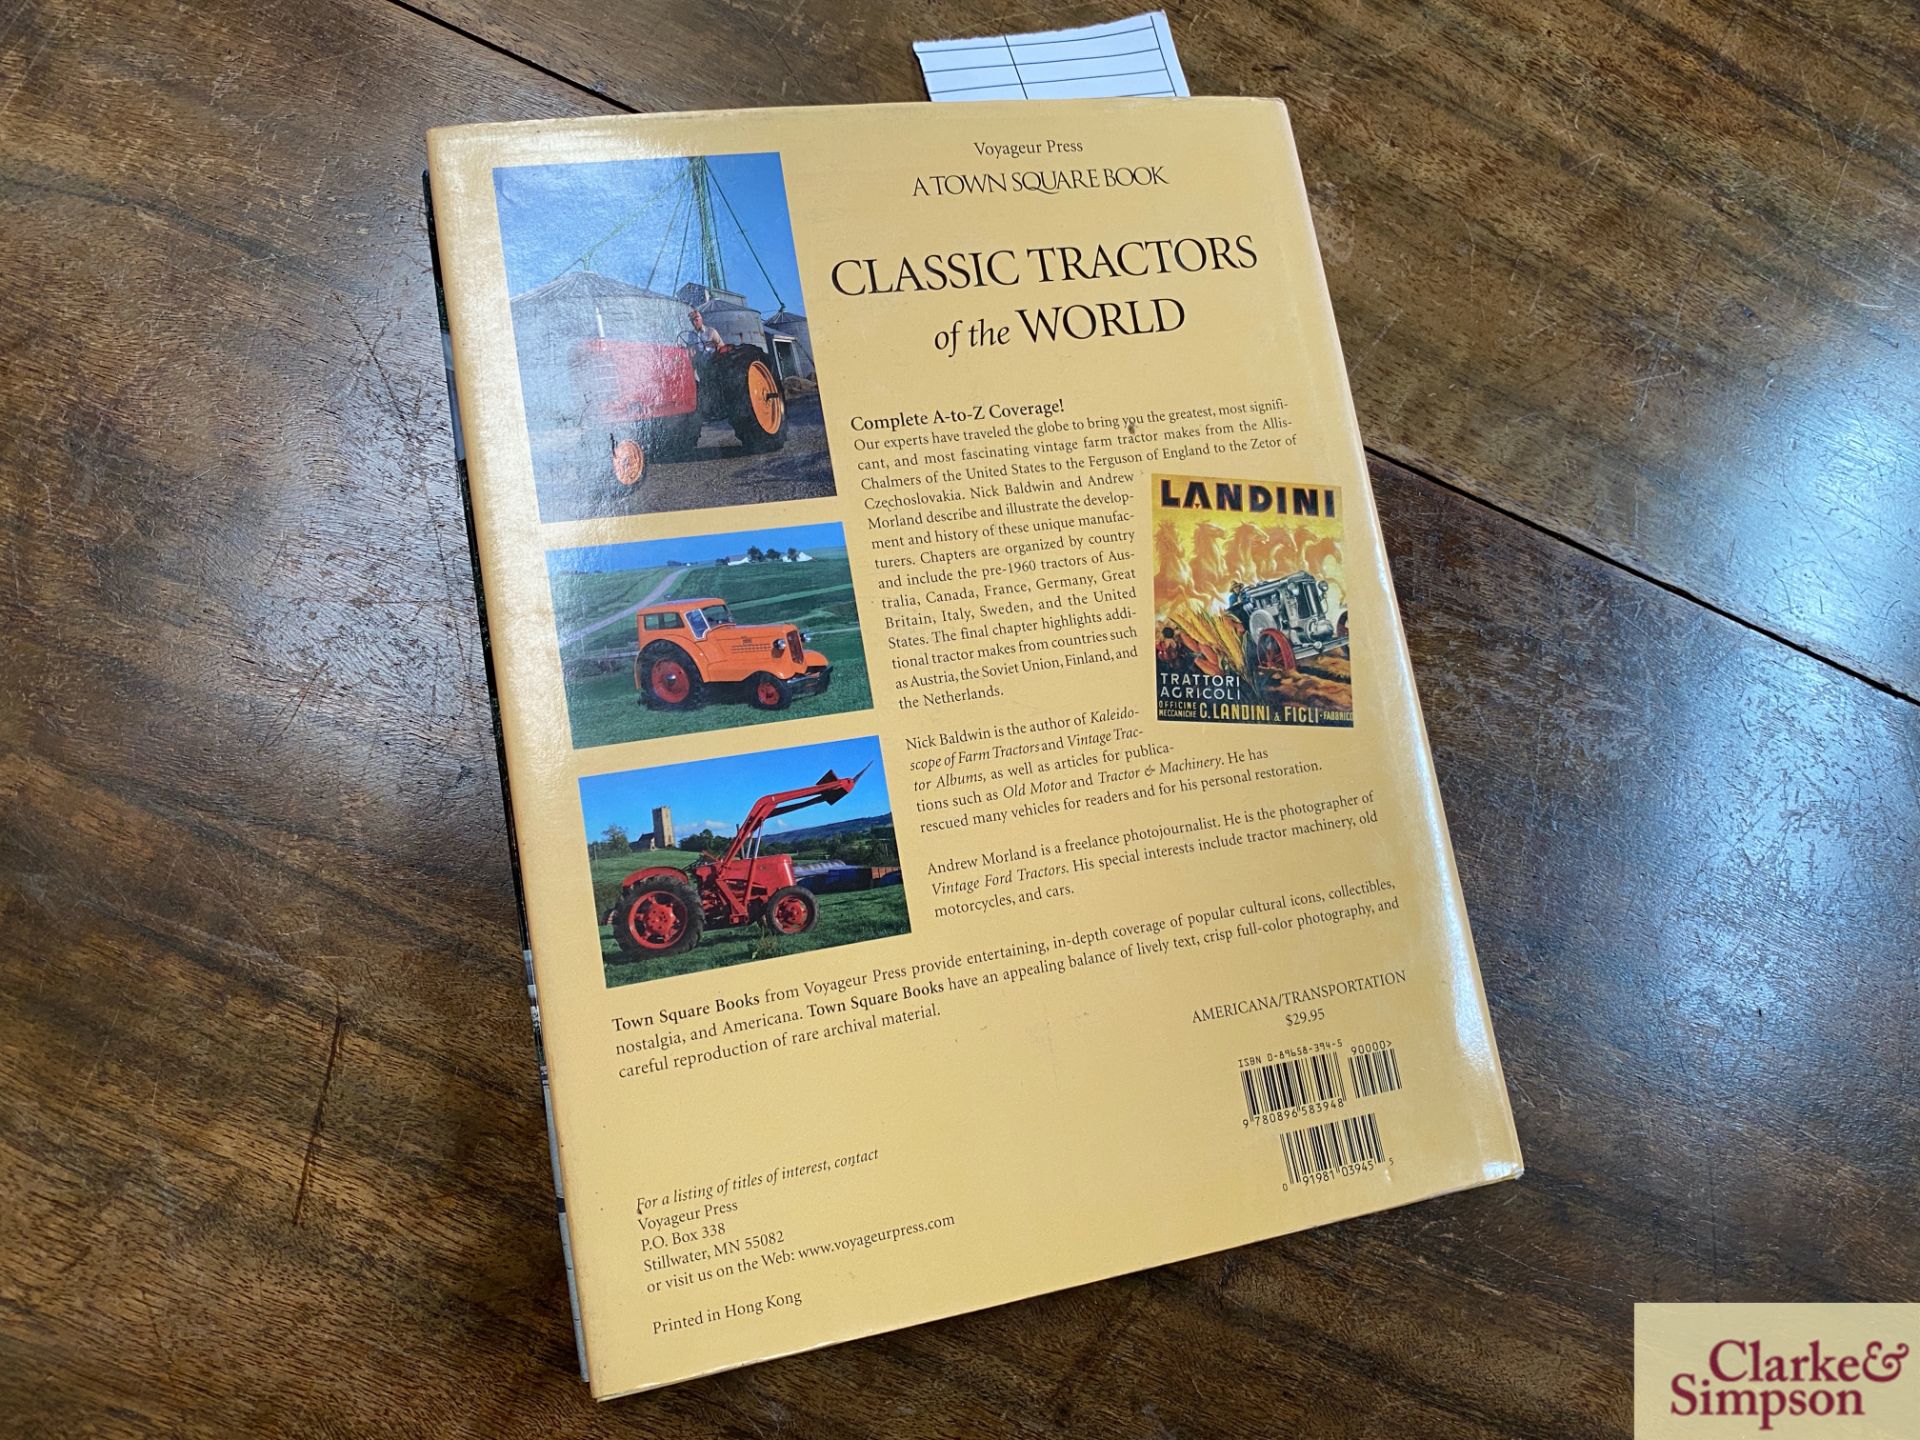 Classic Tractors of the World Hardback Book. - Image 2 of 2